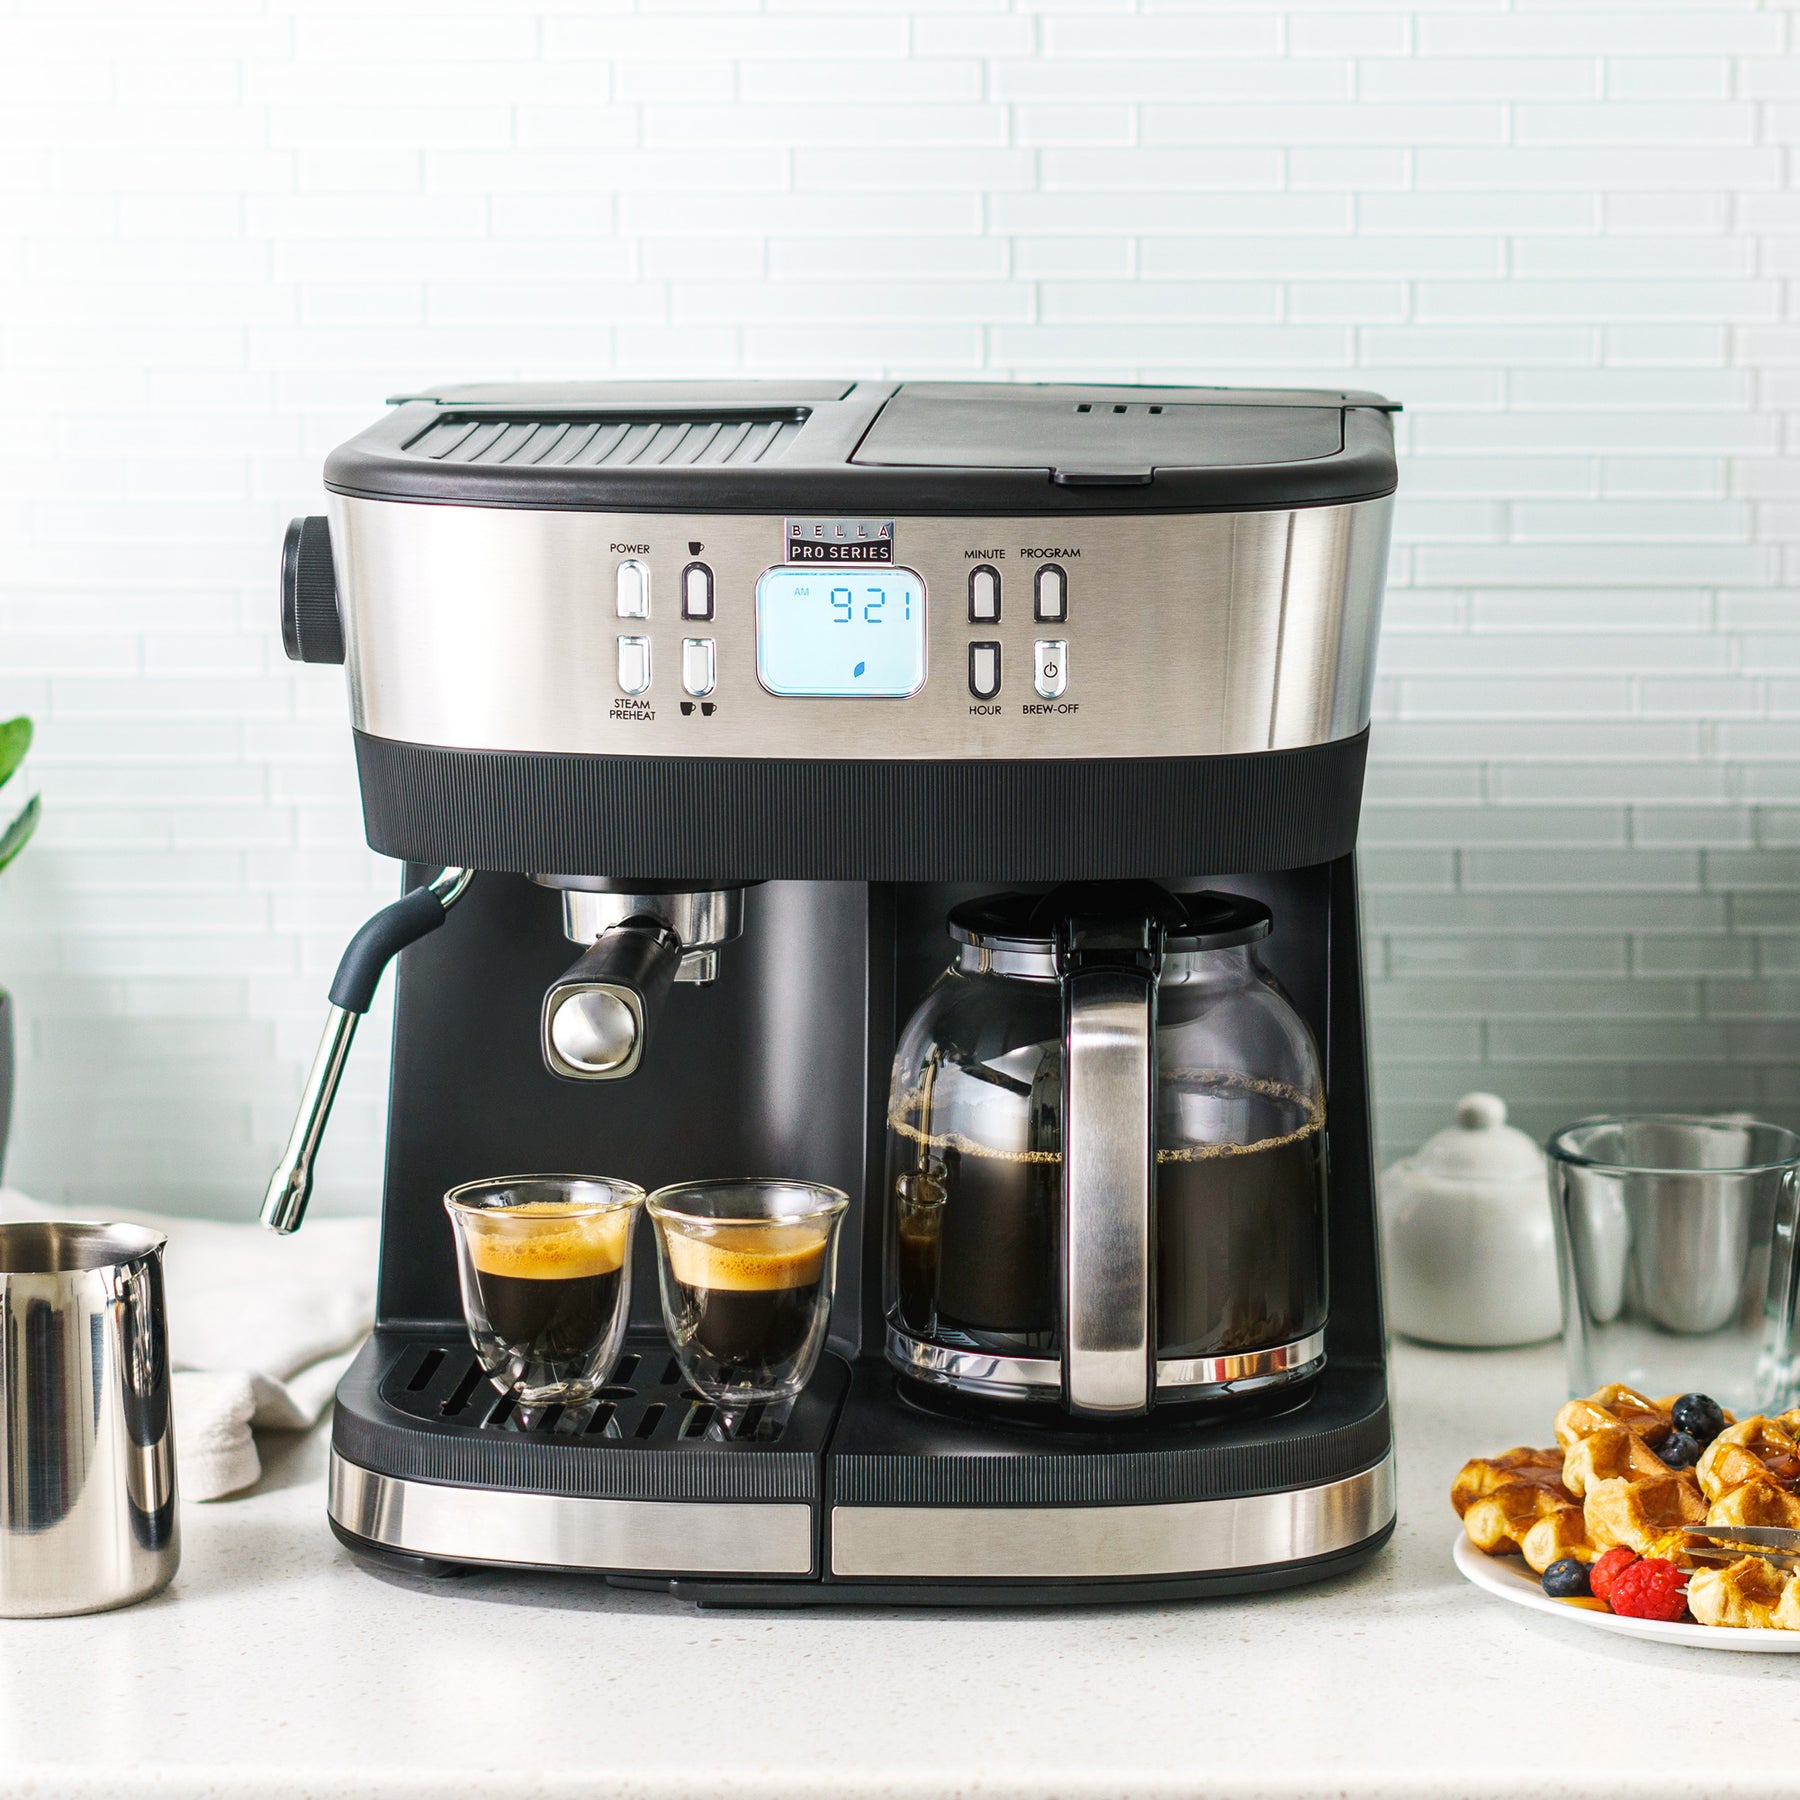 Bella Pro Series Combo 19-Bar Espresso and 10-Cup Drip Coffee Maker  Stainless Steel 90103 - Best Buy